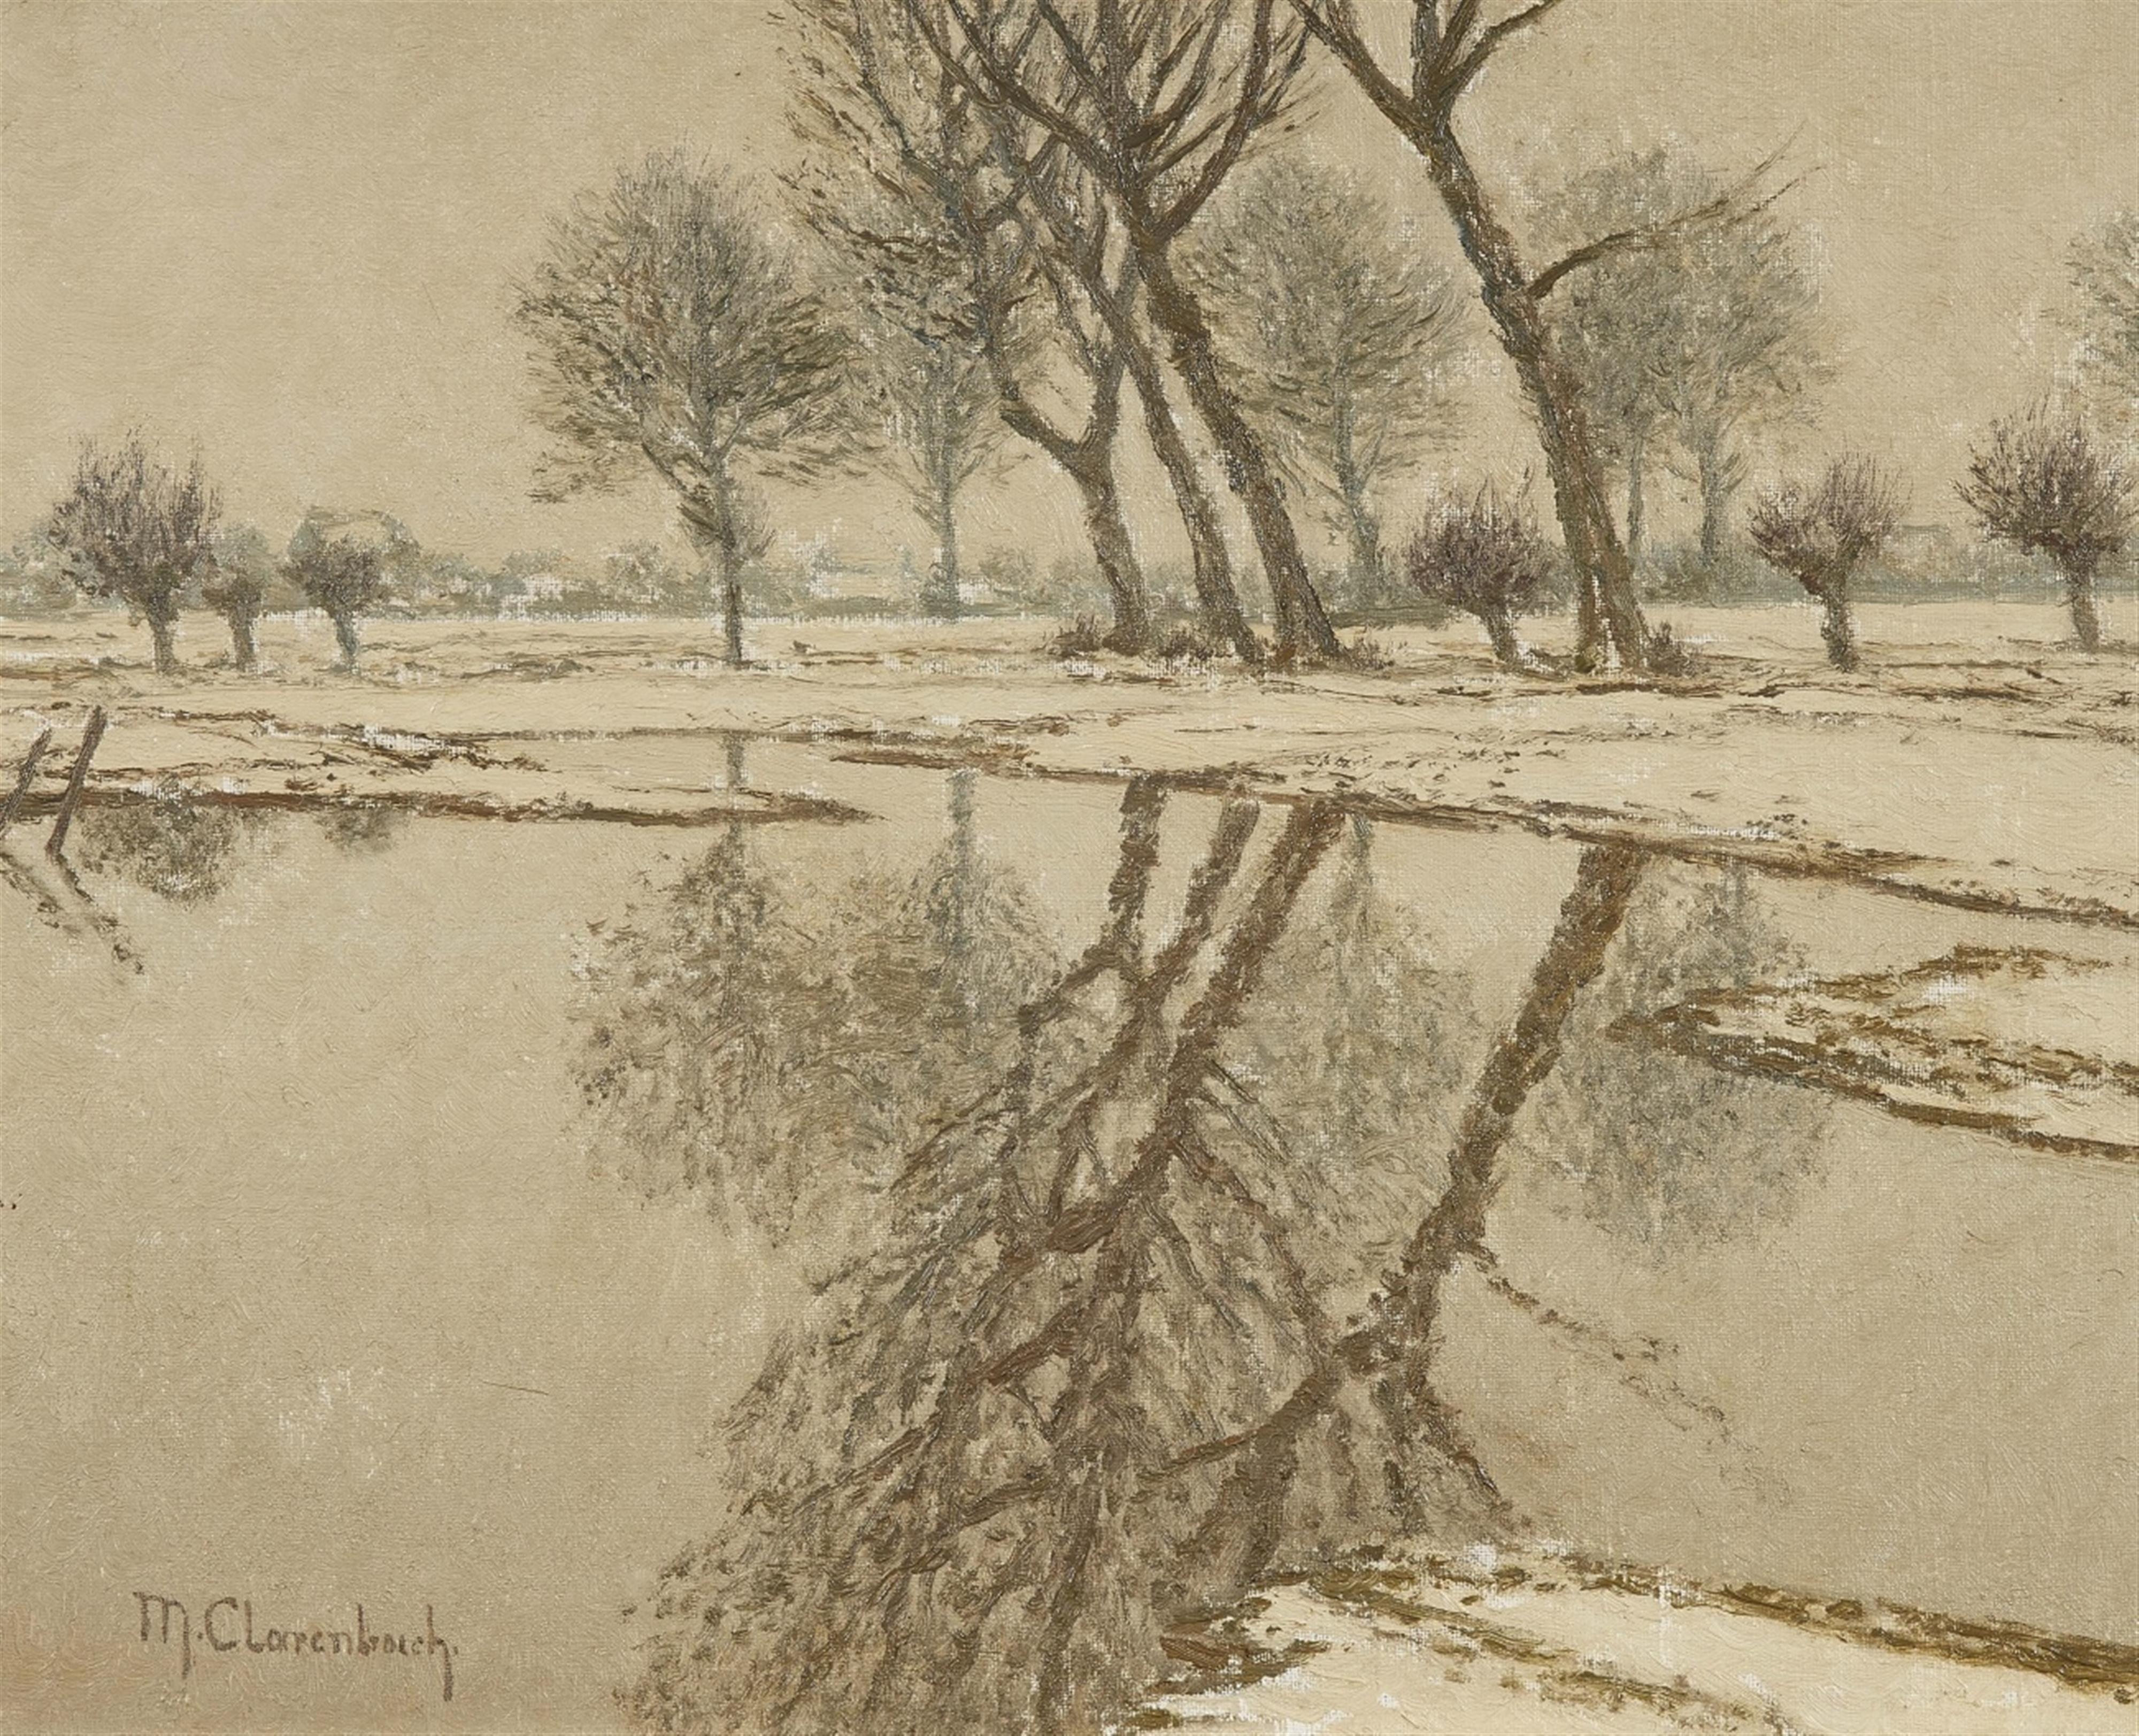 Max Clarenbach - Winter Floods at Wittlaer - image-1